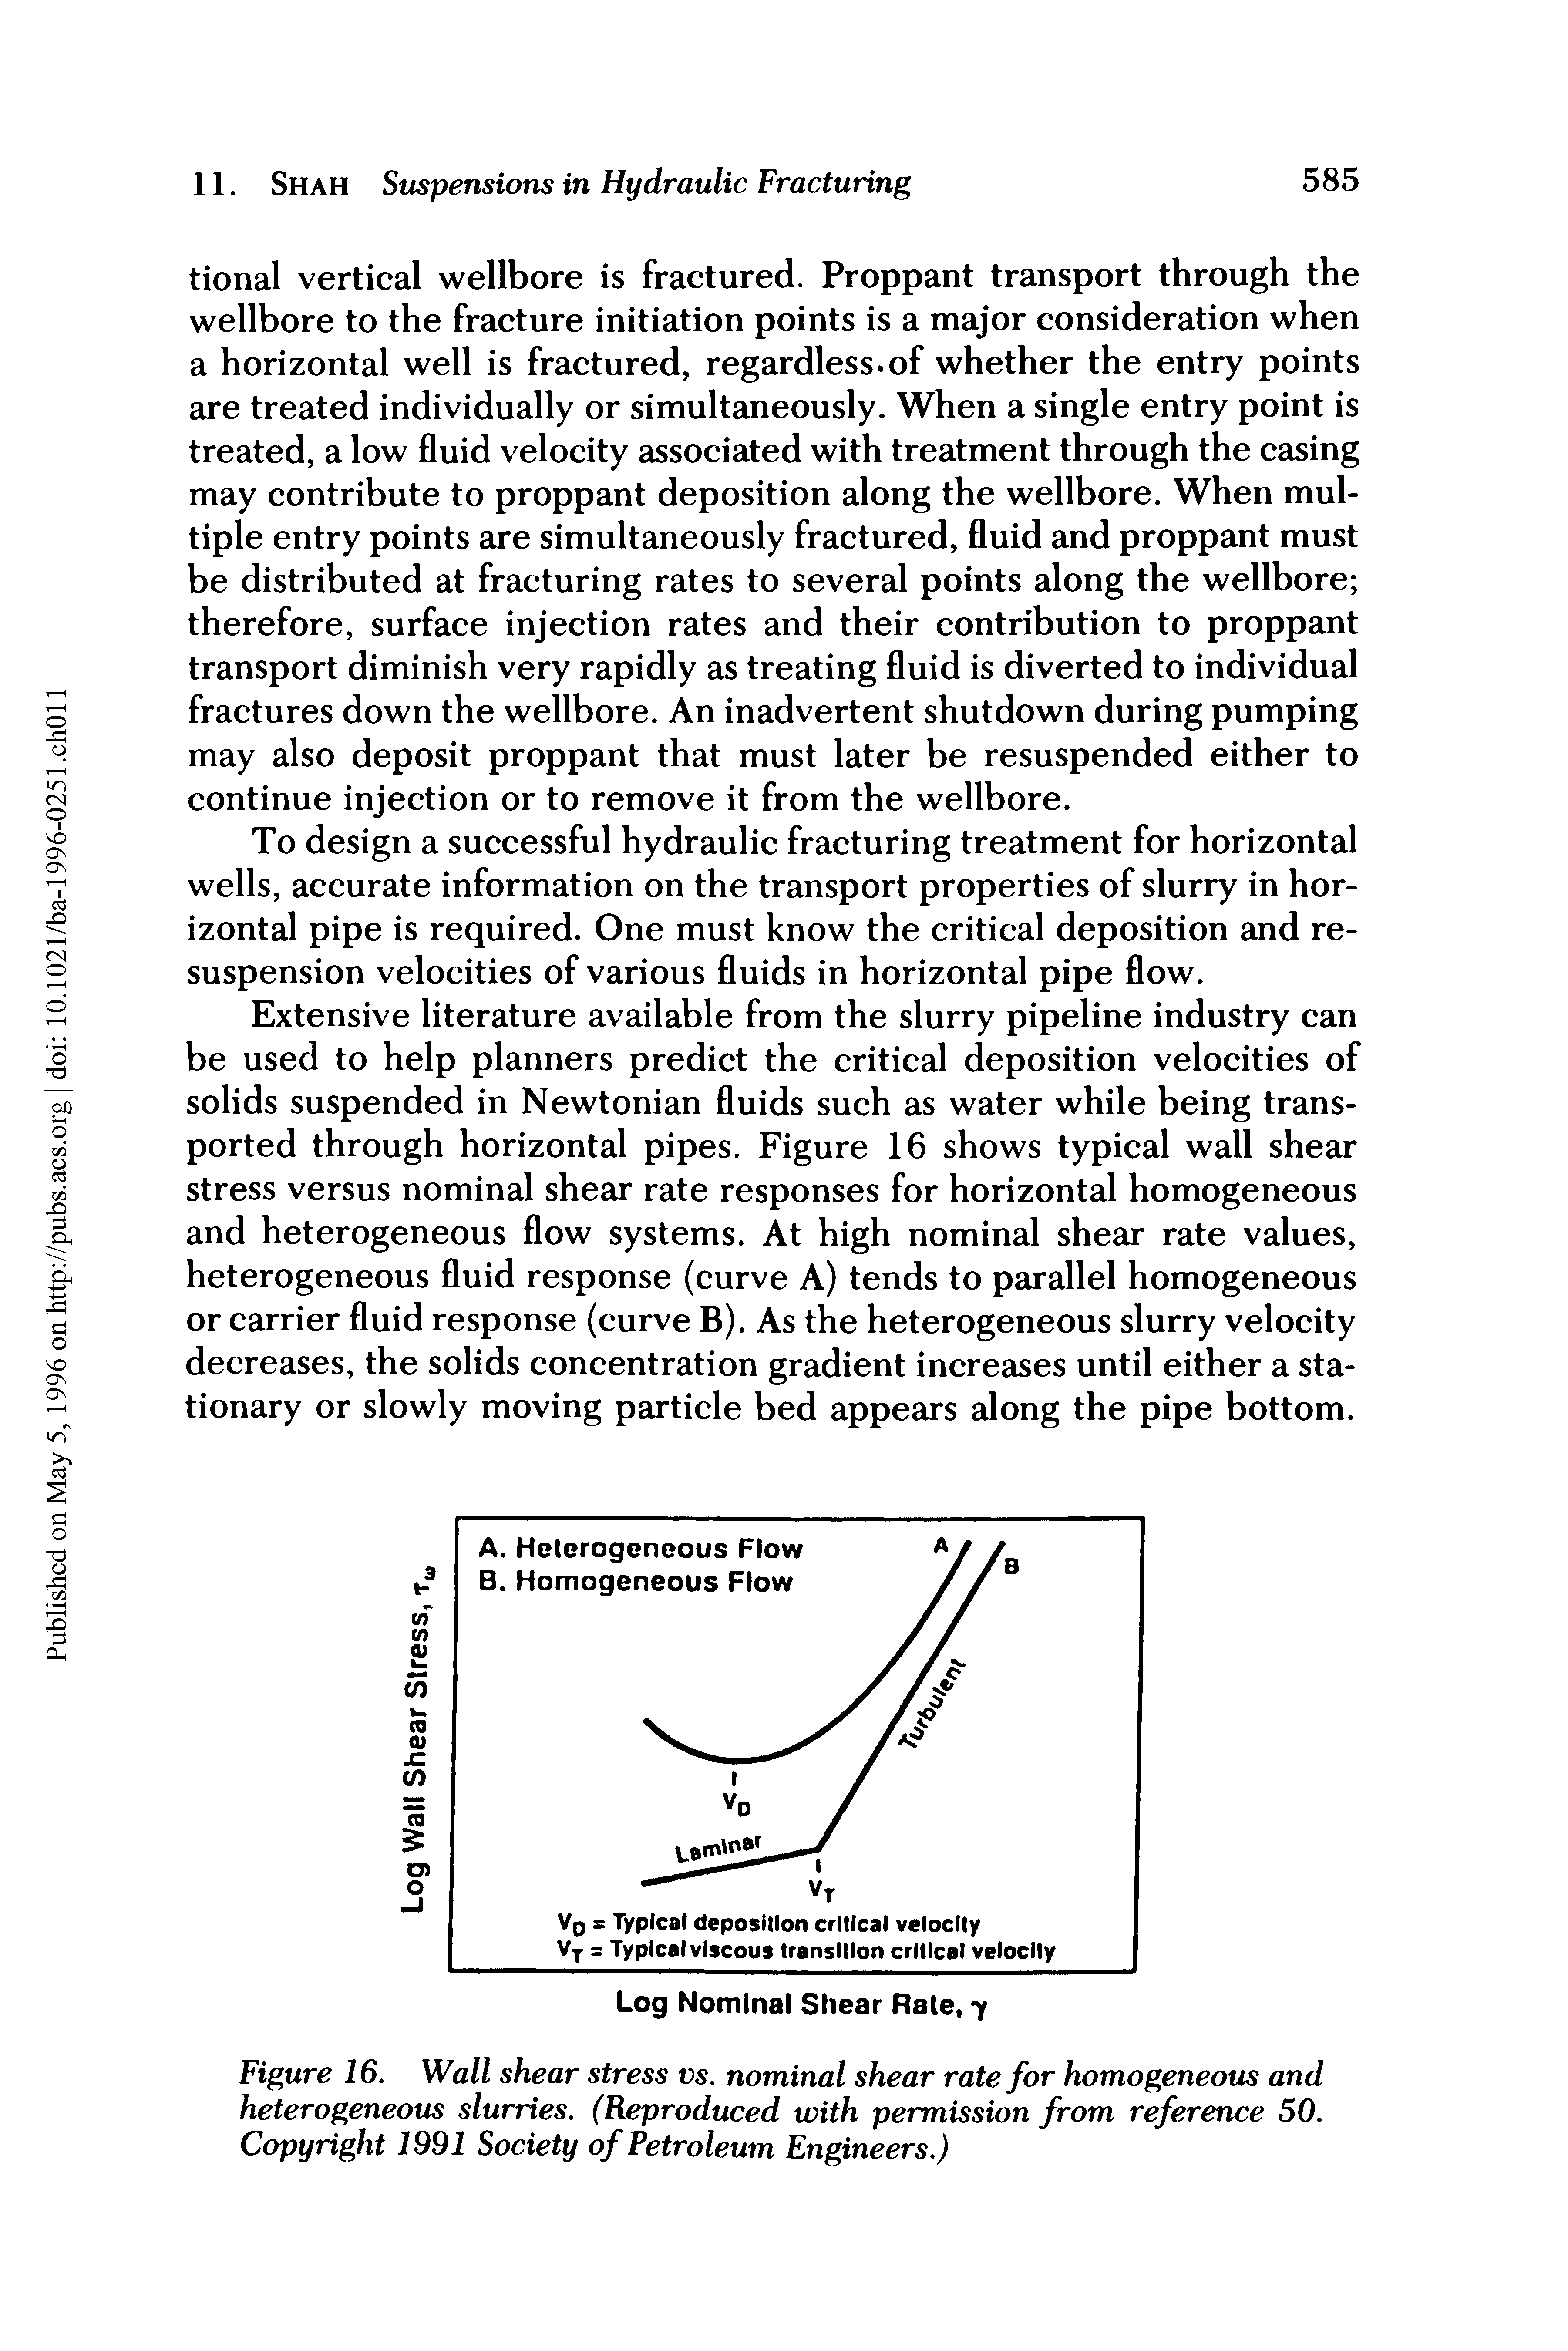 Figure 16. Wall shear stress vs. nominal shear rate for homogeneous and heterogeneous slurries. (Reproduced with permission from reference 50. Copyright 1991 Society of Petroleum Engineers.)...